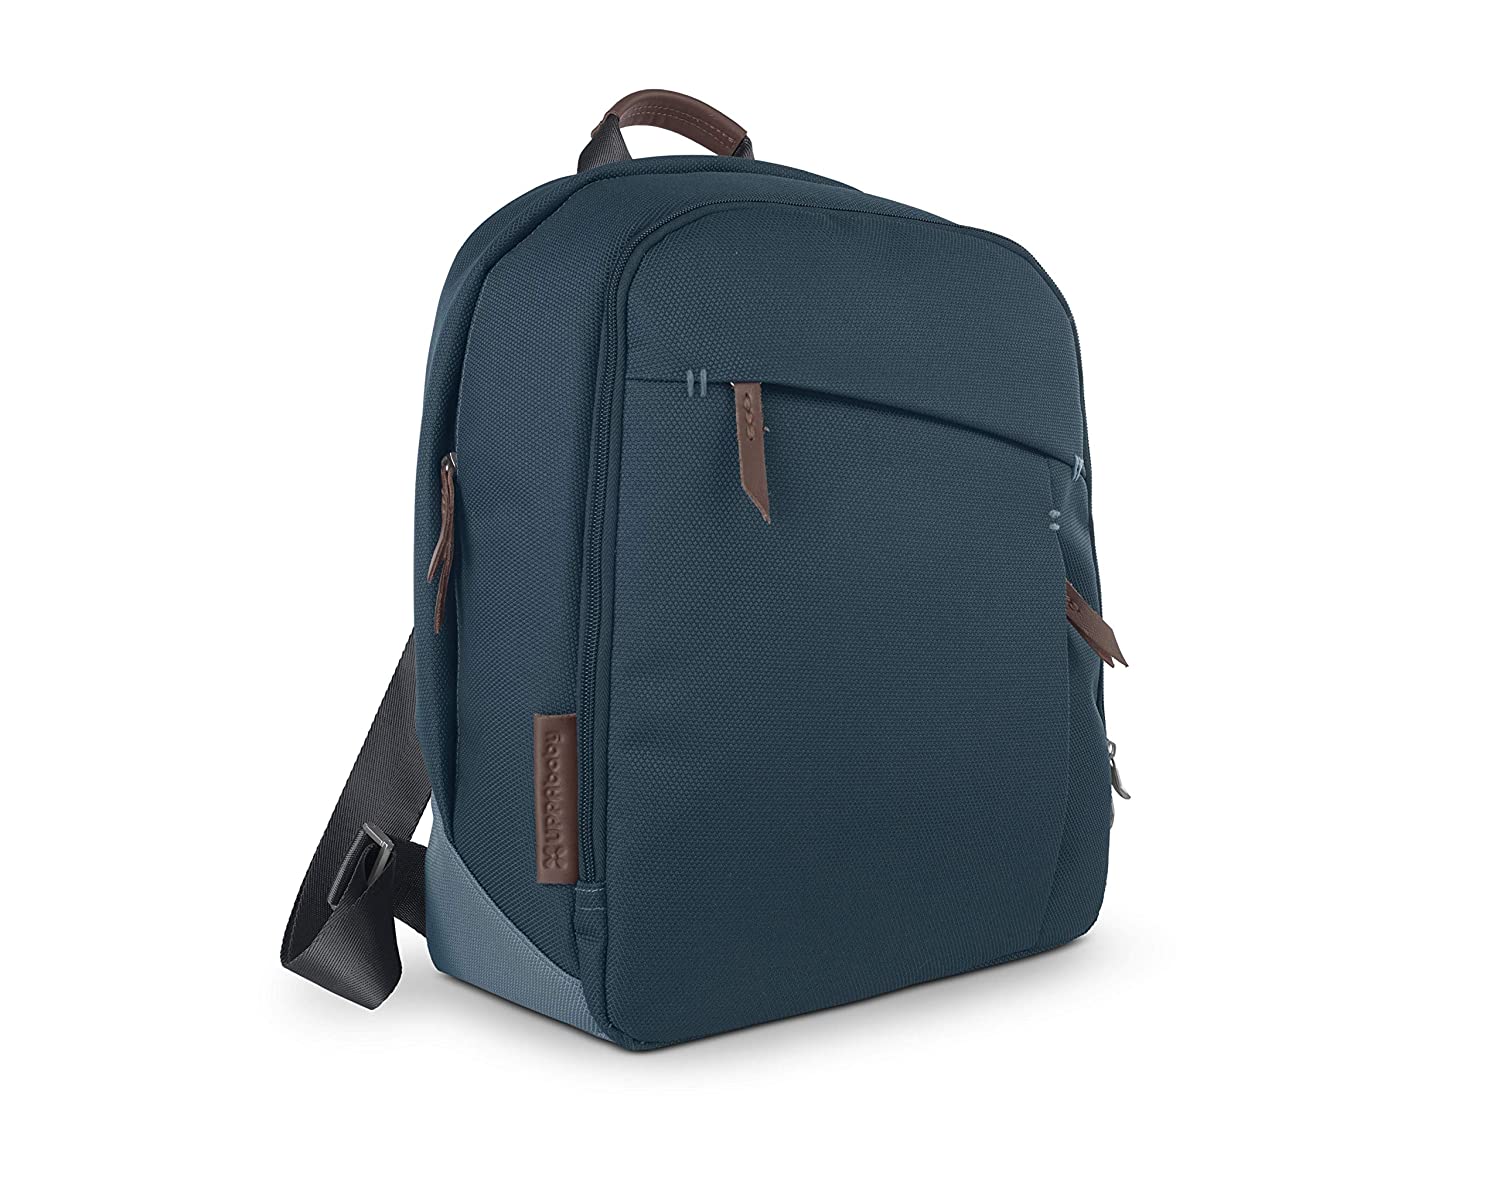 UPPAbaby Changing Backpack - FINN (deep sea/chestnut leather)